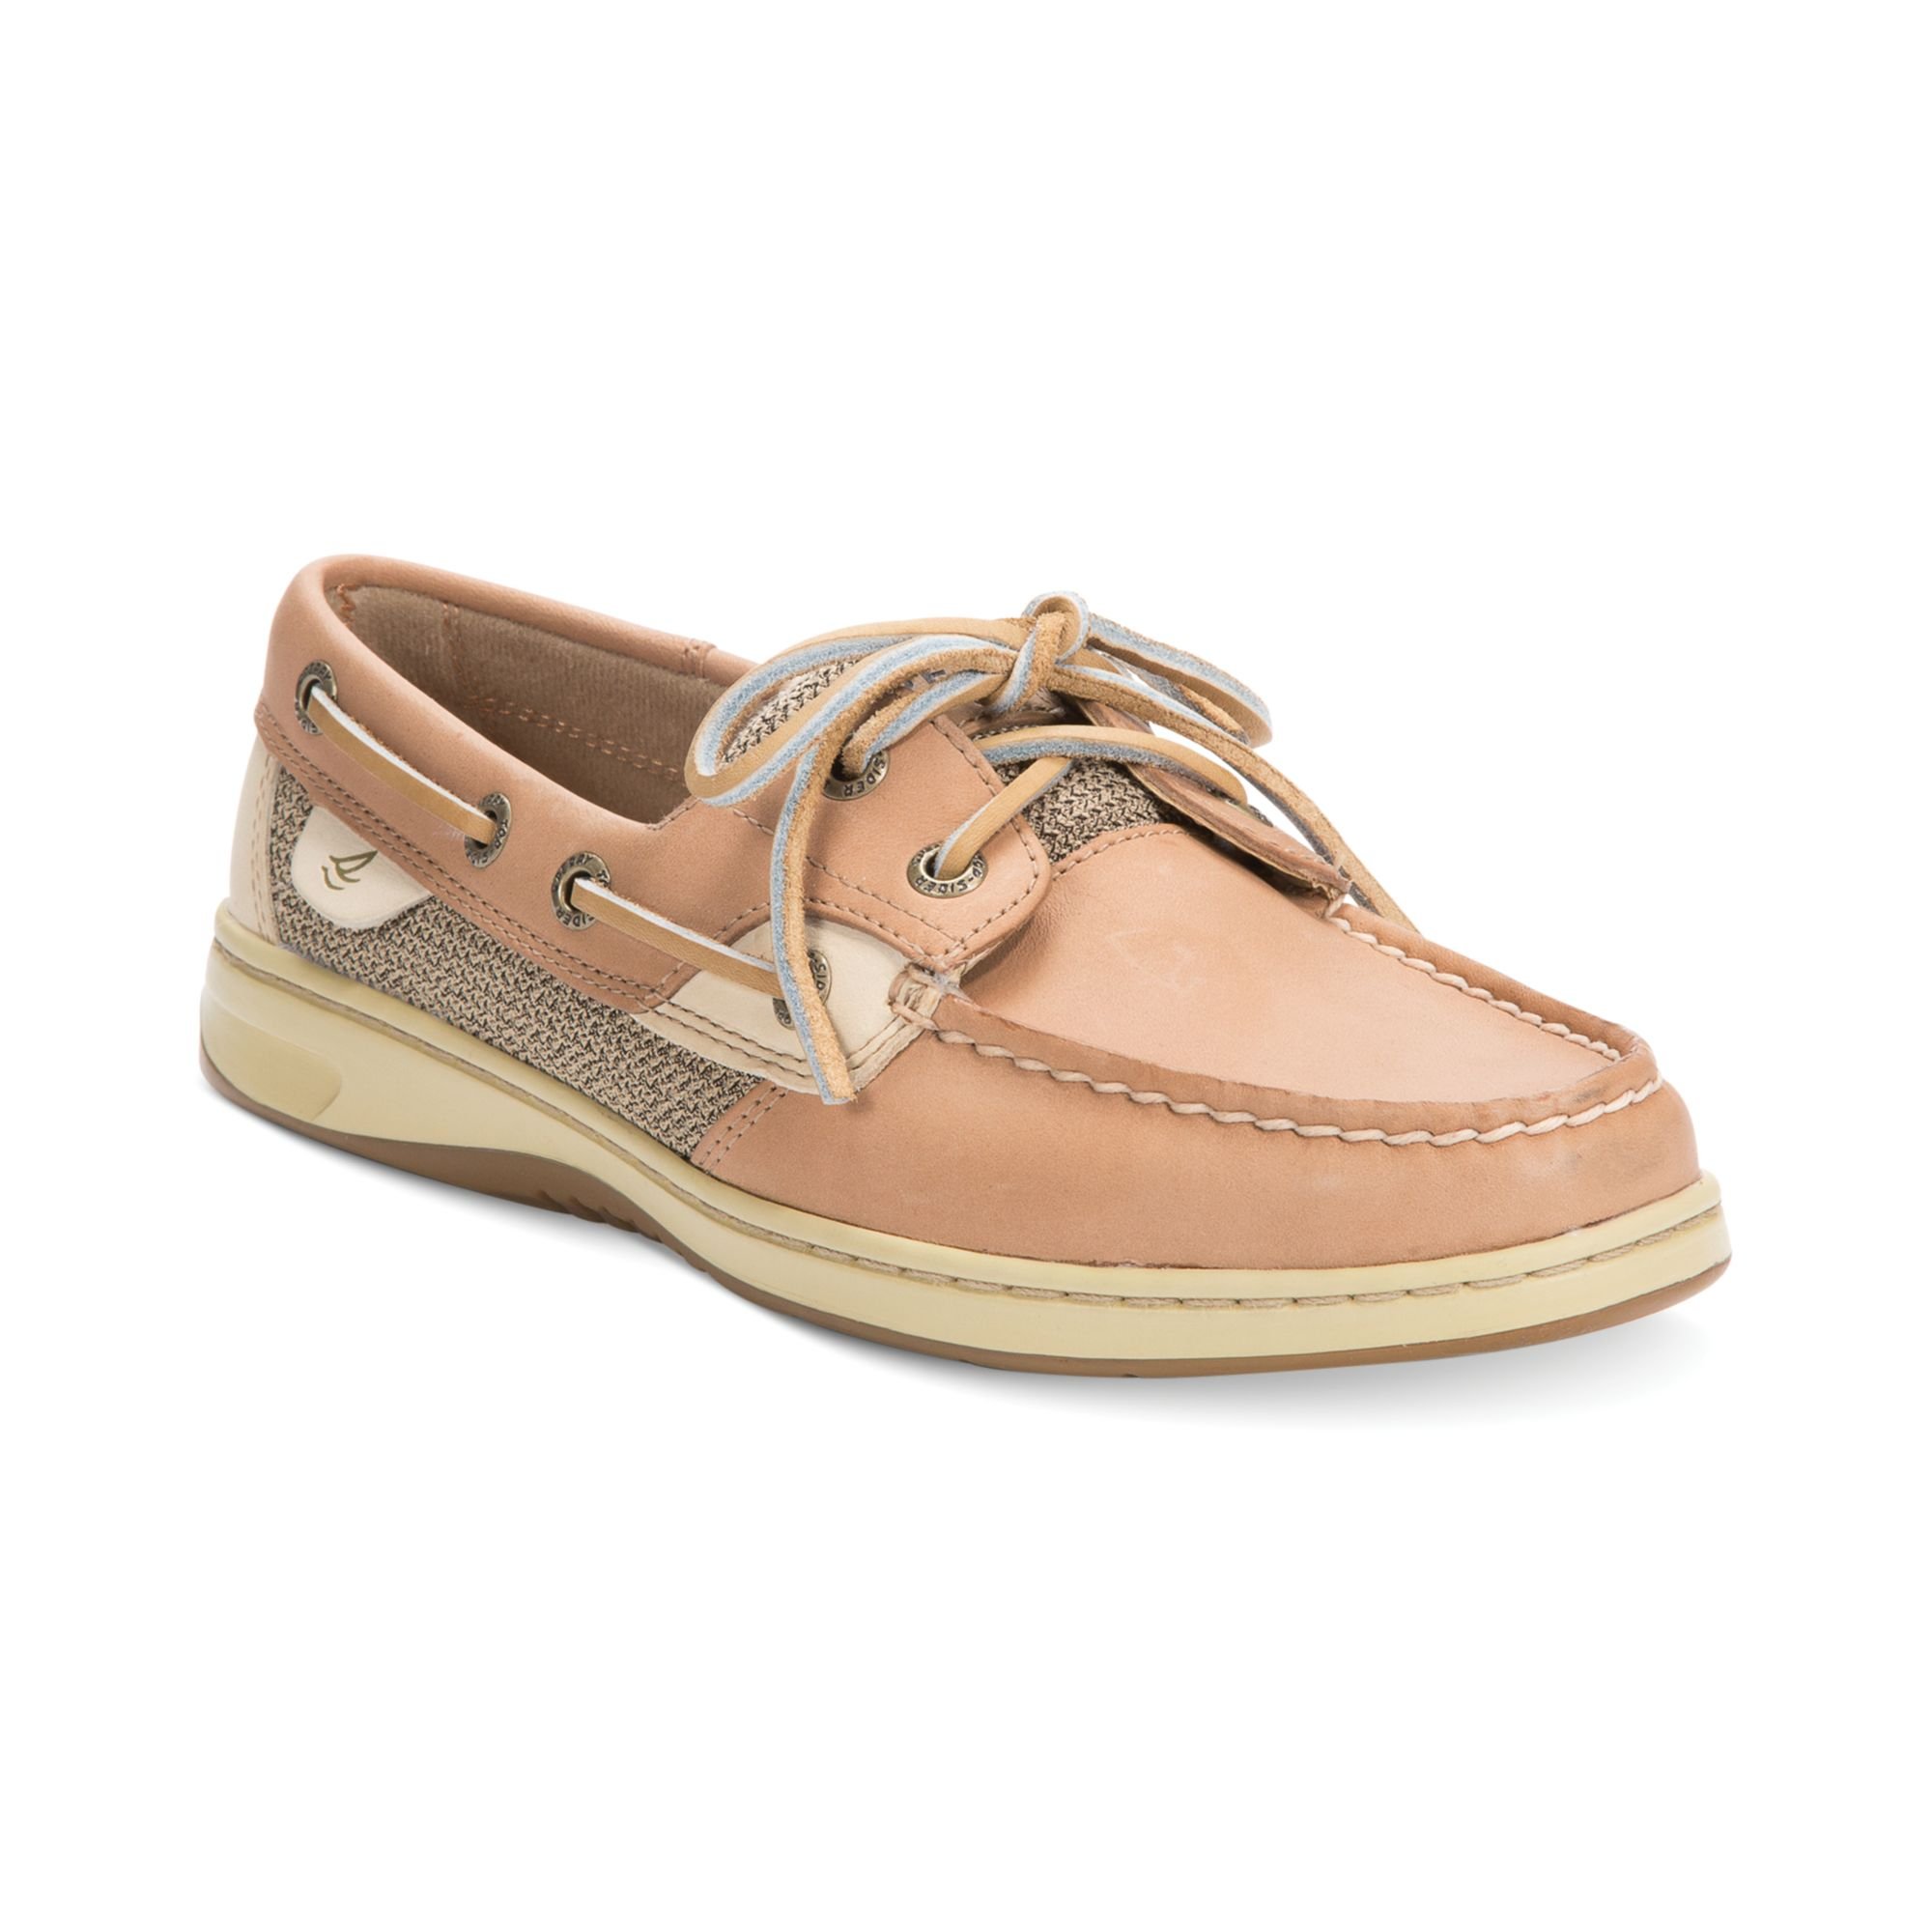 Boat Shoes Sperry Top Sider